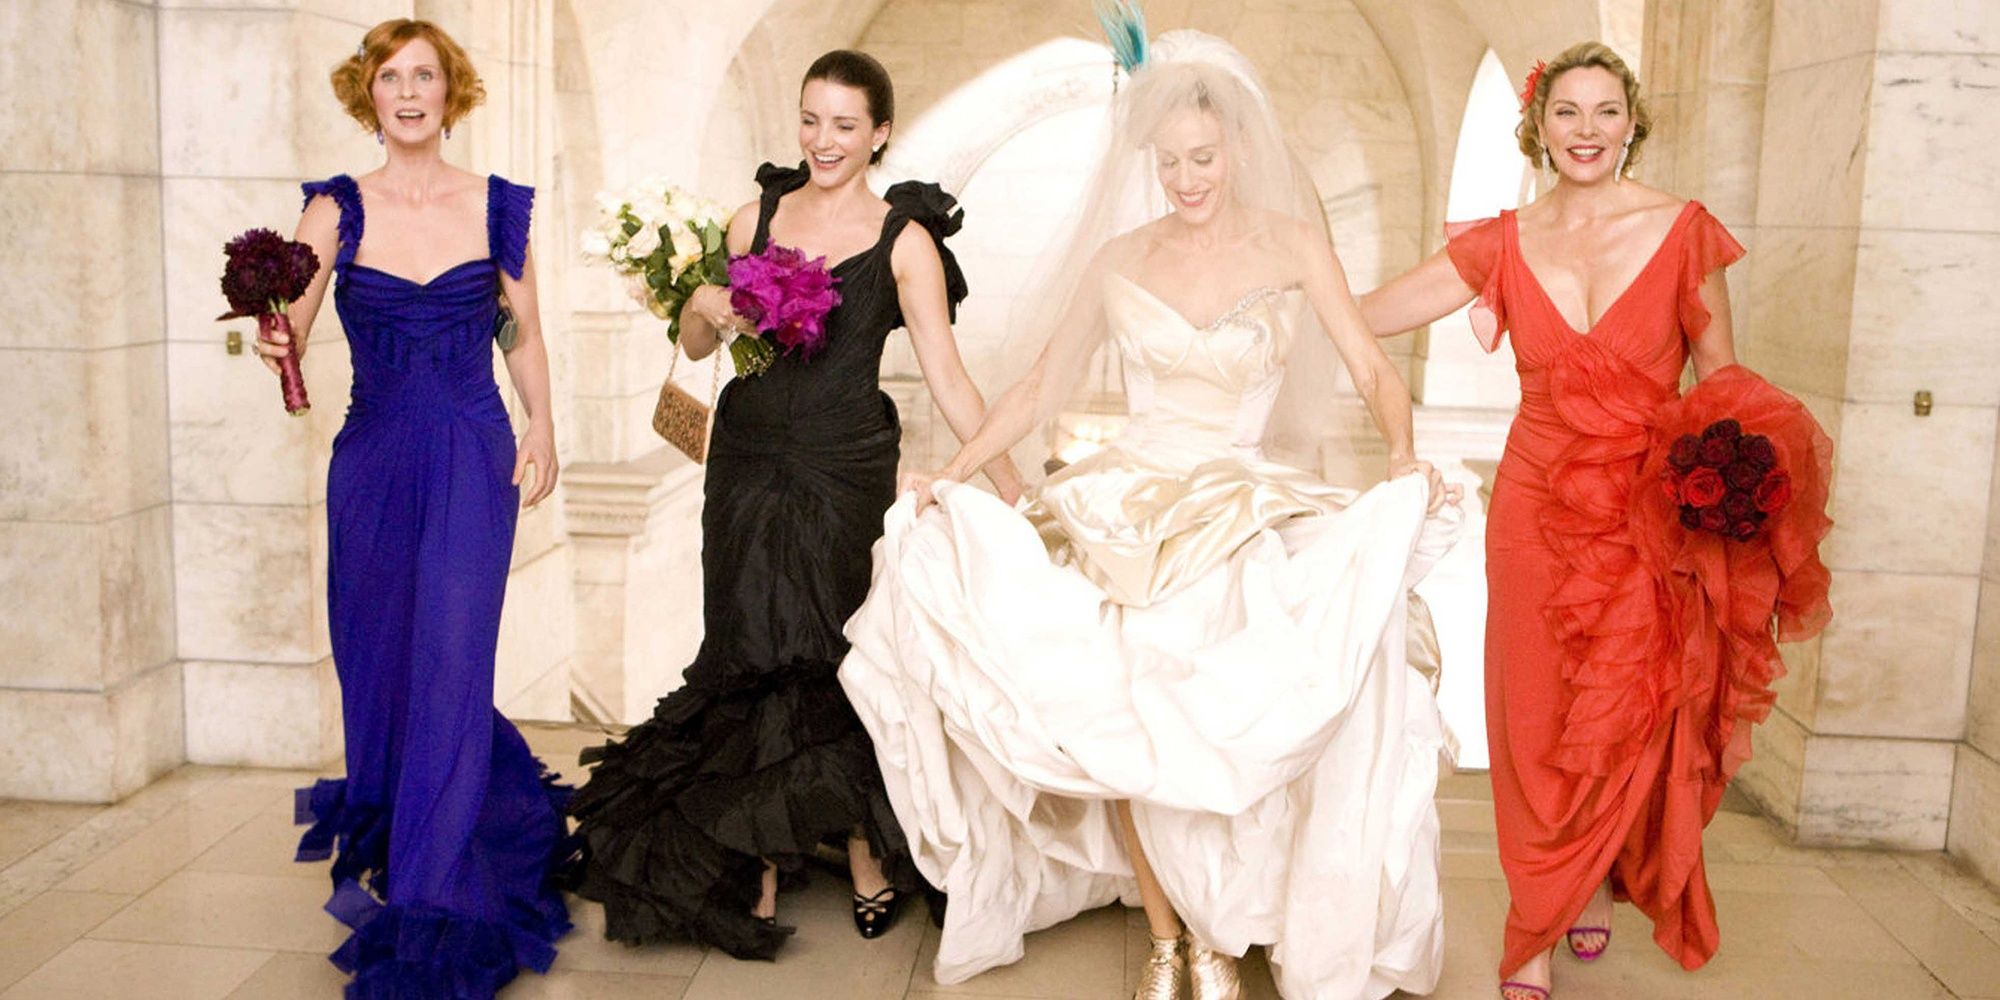 Carrie and her friends dressed up for Carrie's wedding in the first Sex and the City movie